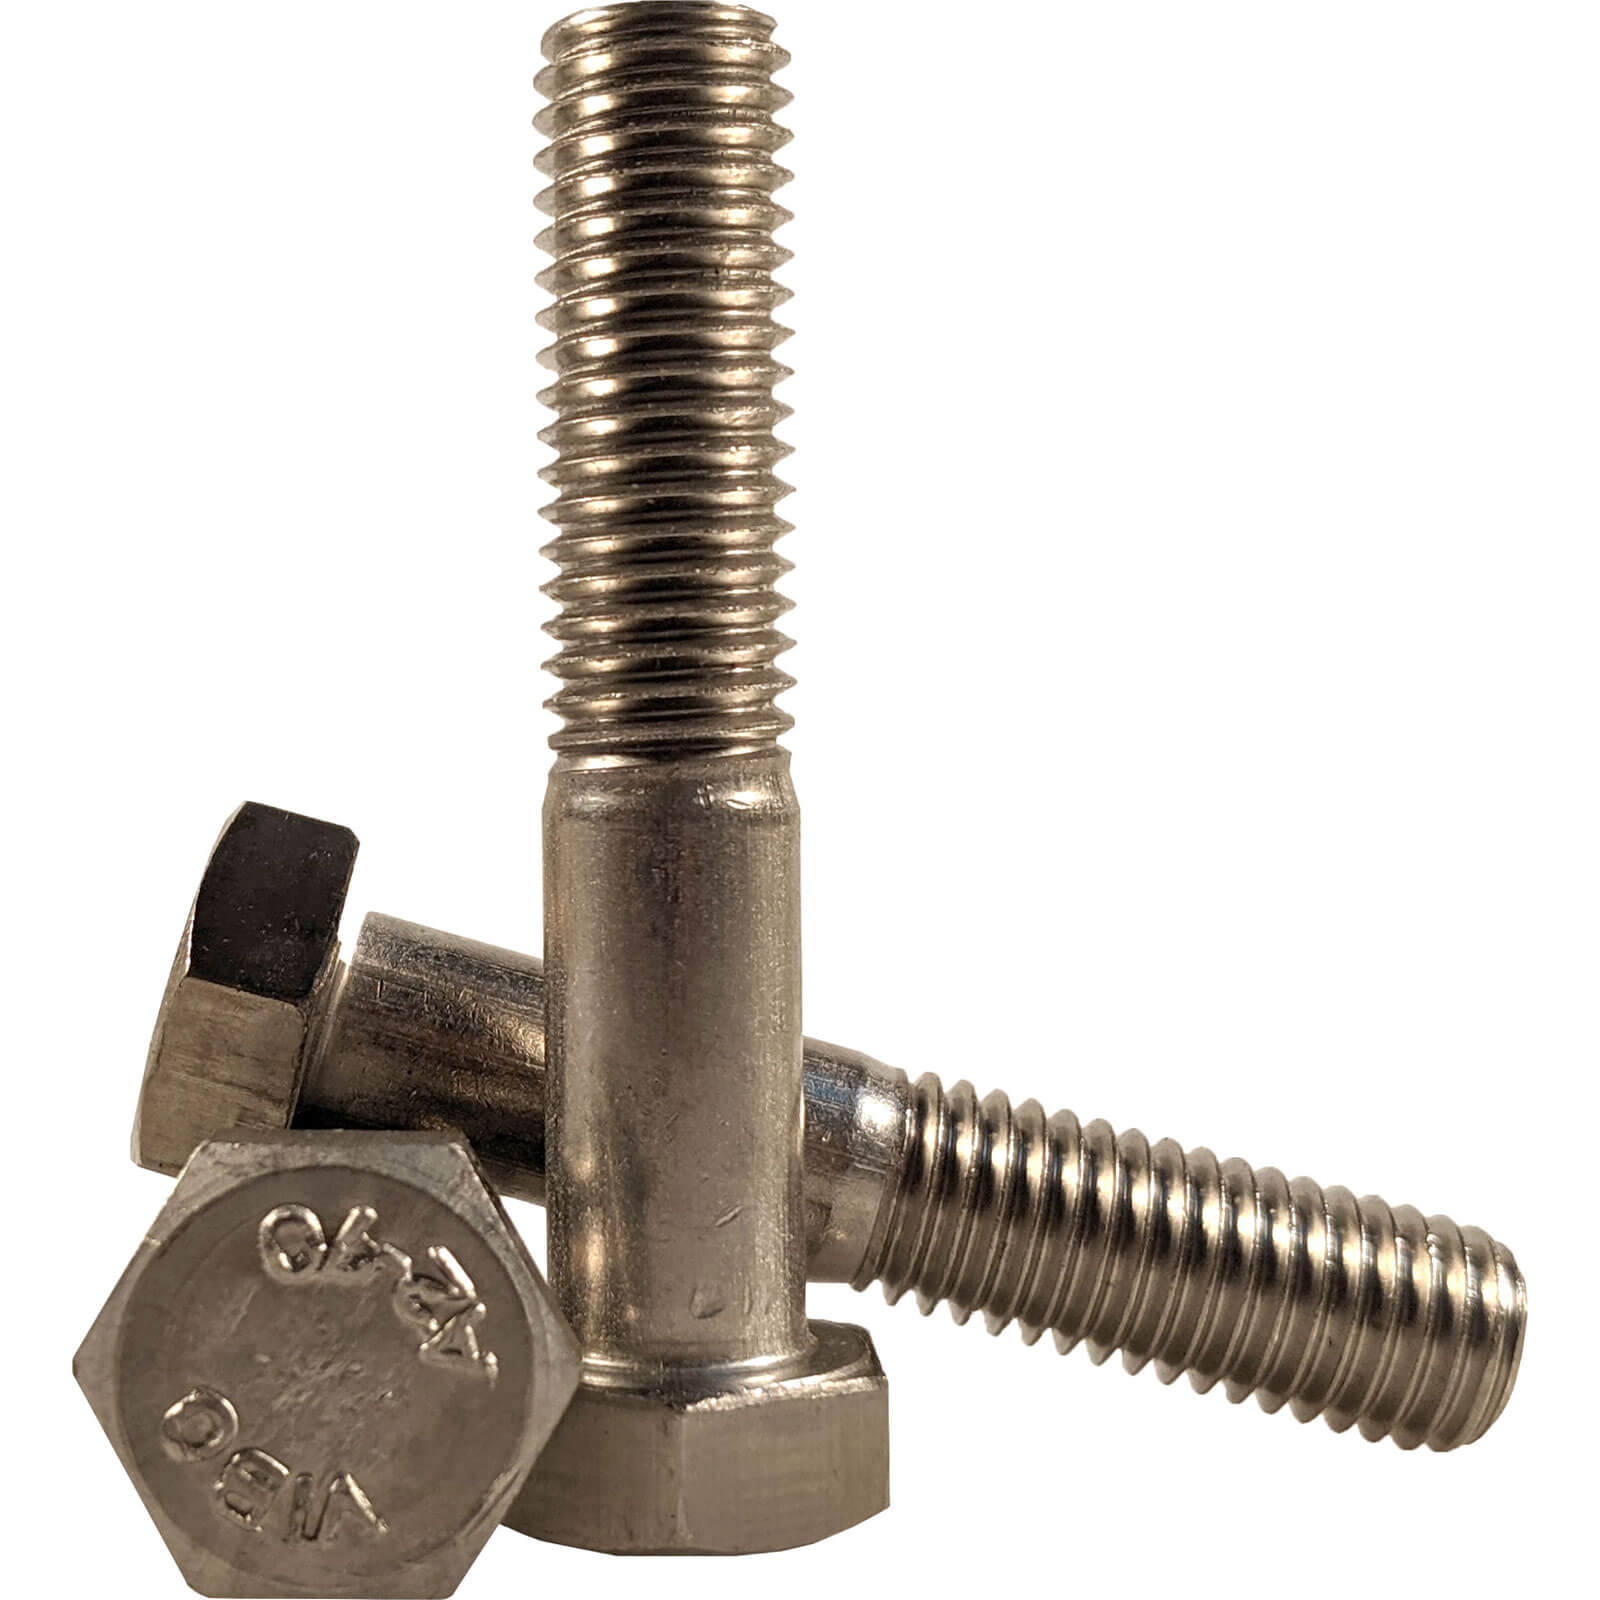 Image of Sirius Bolts A4 316 Stainless Steel M24 120mm Pack of 1